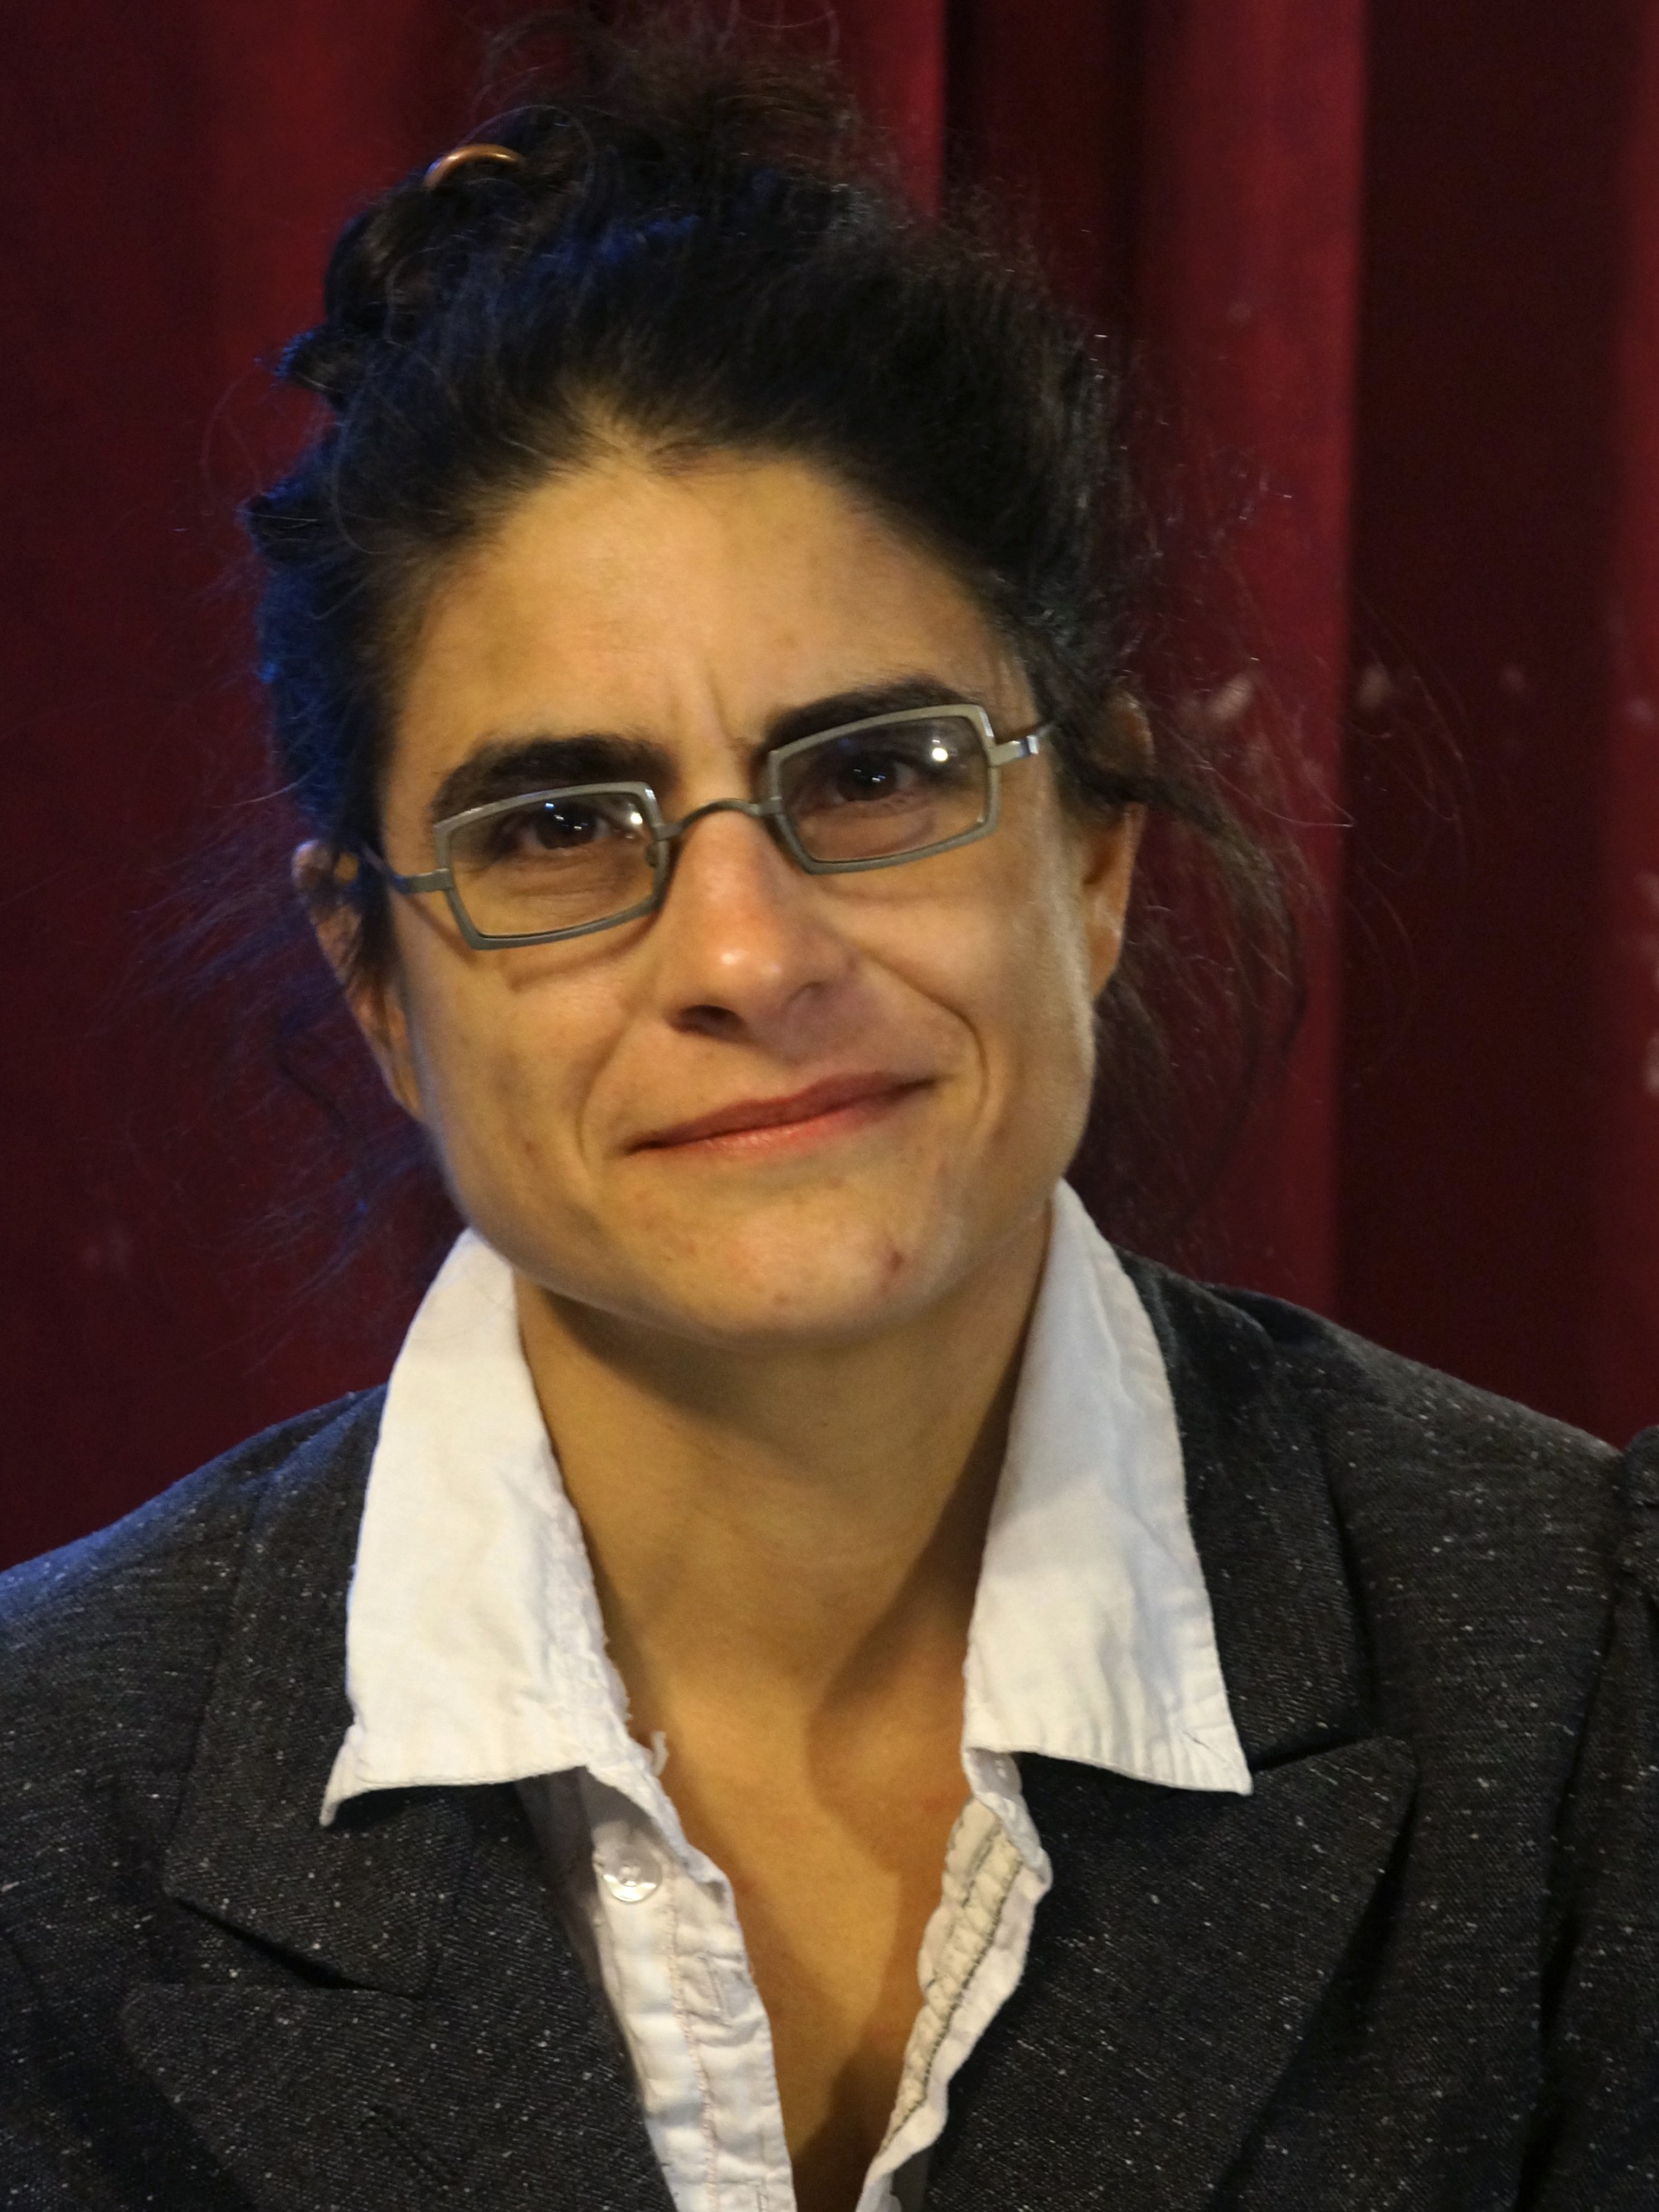 Head and shoulders of a smiling white woman with dark hair in a bun, in a white collared shirt, a gray jacket, and square glasses.